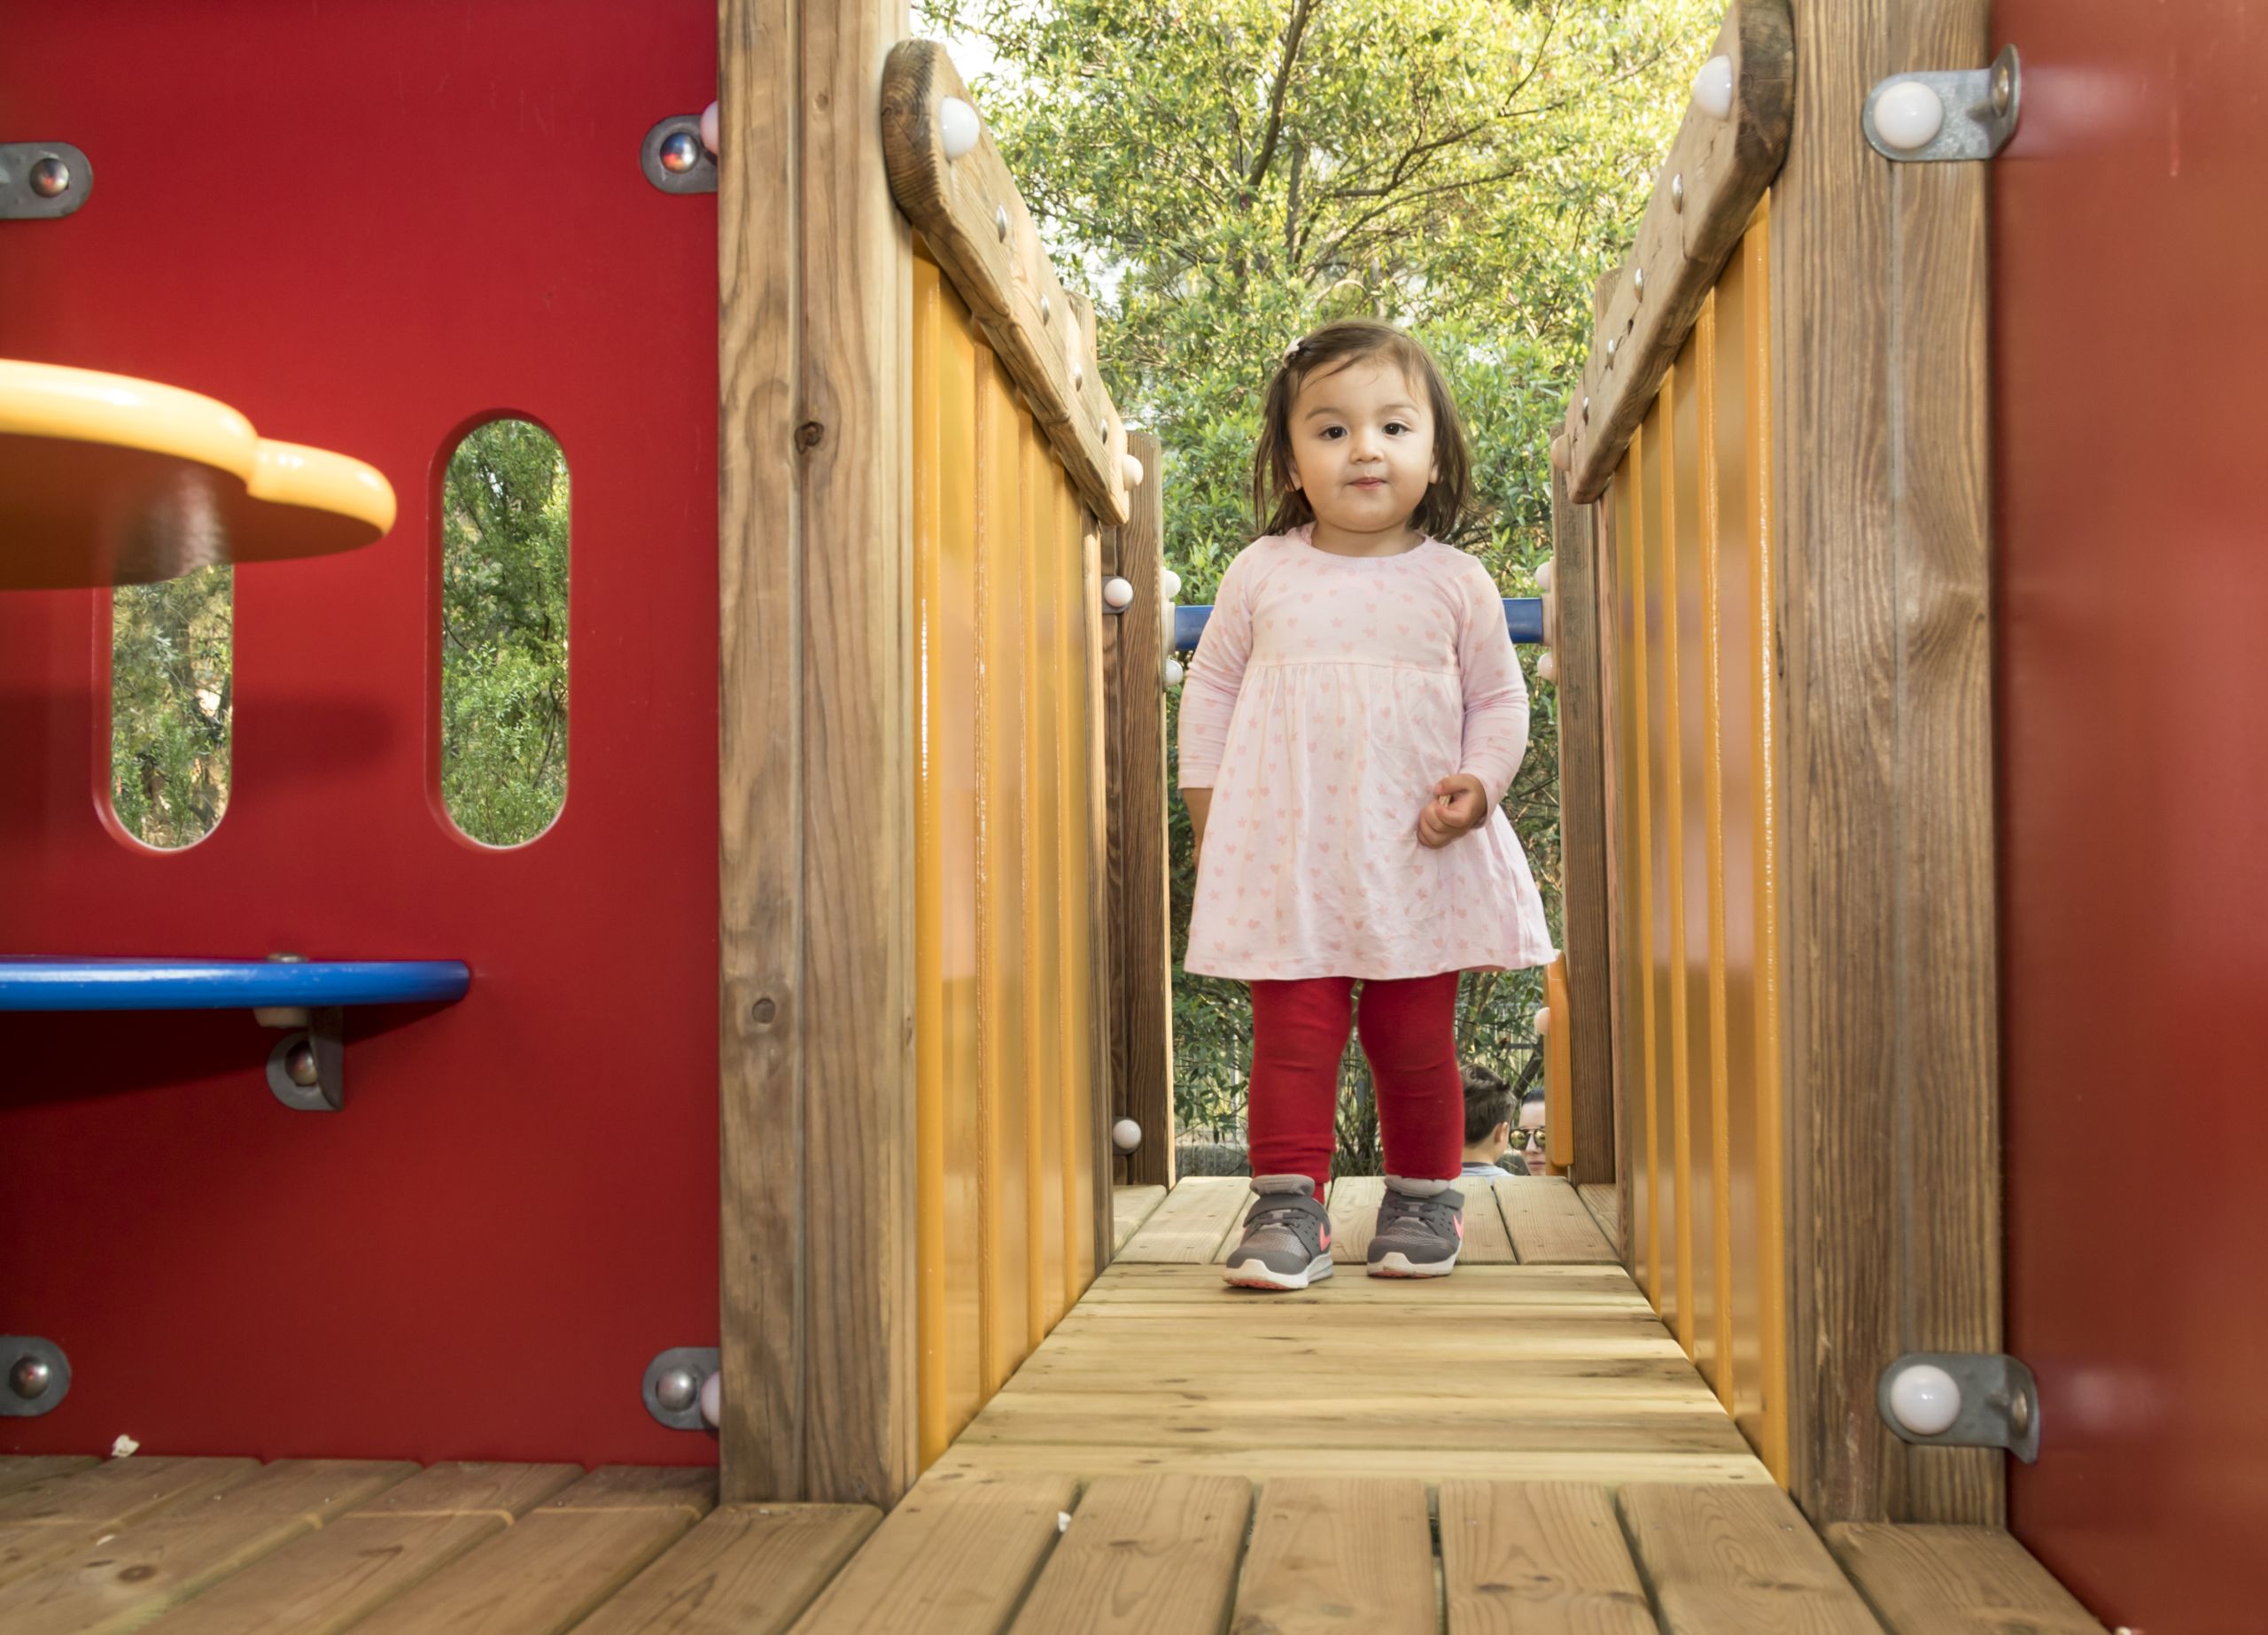 A young girl is walking across an imaginative play bridge. She is smiling.